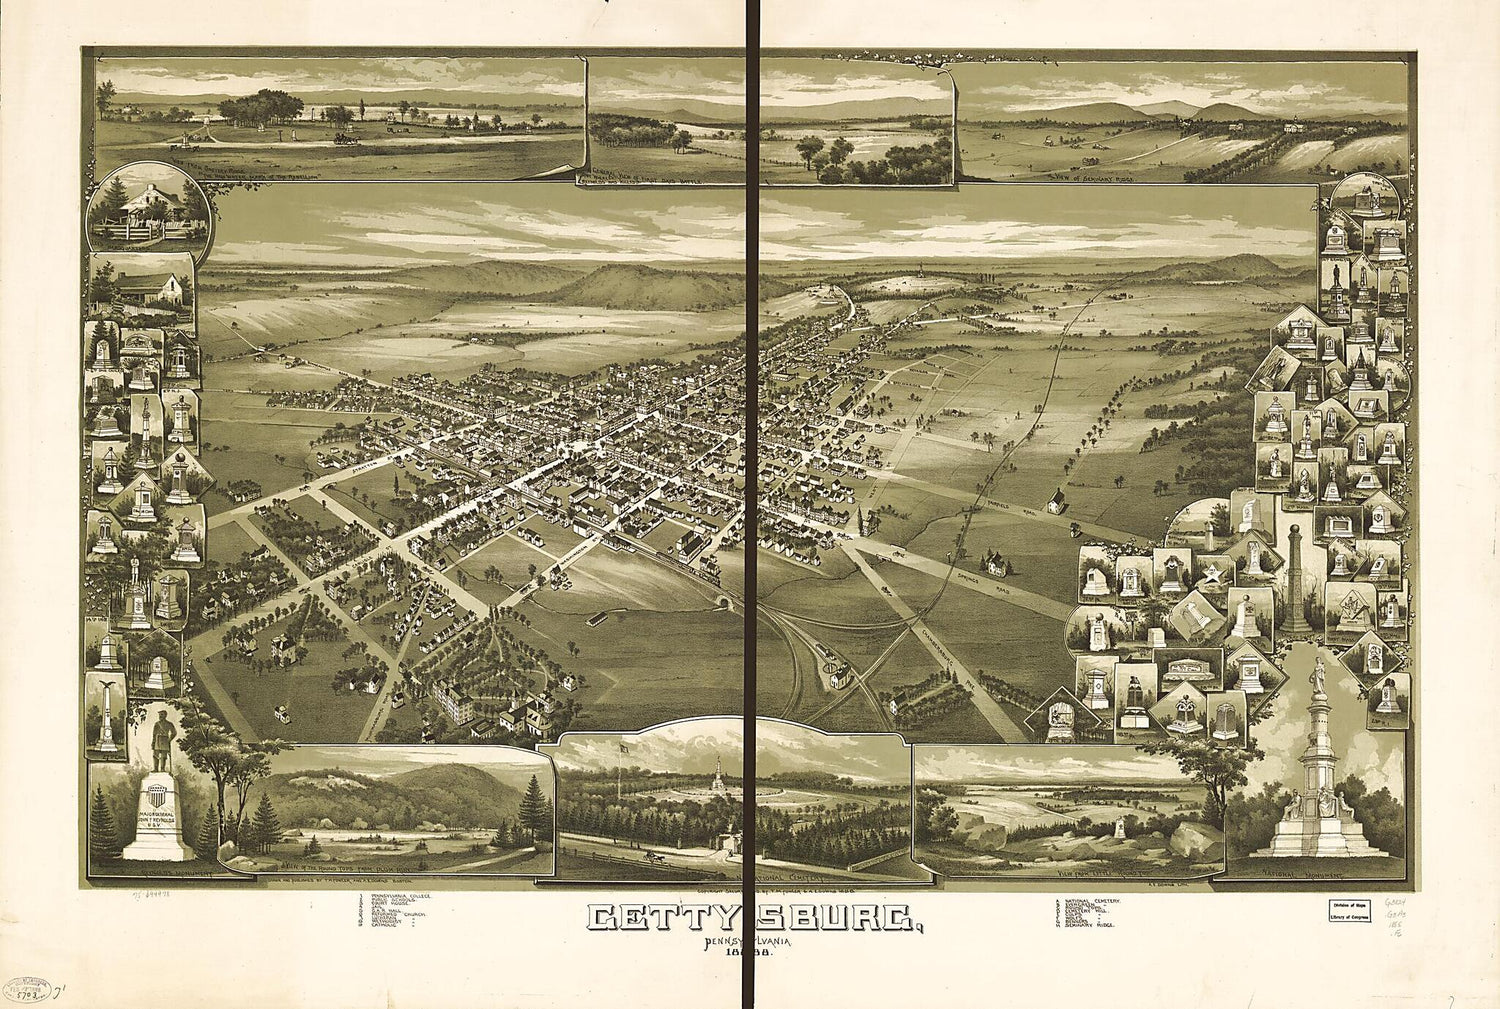 This old map of Gettysburg, Pennsylvania from 1888 was created by A. E. (Albert E.) Downs, T. M. (Thaddeus Mortimer) Fowler in 1888